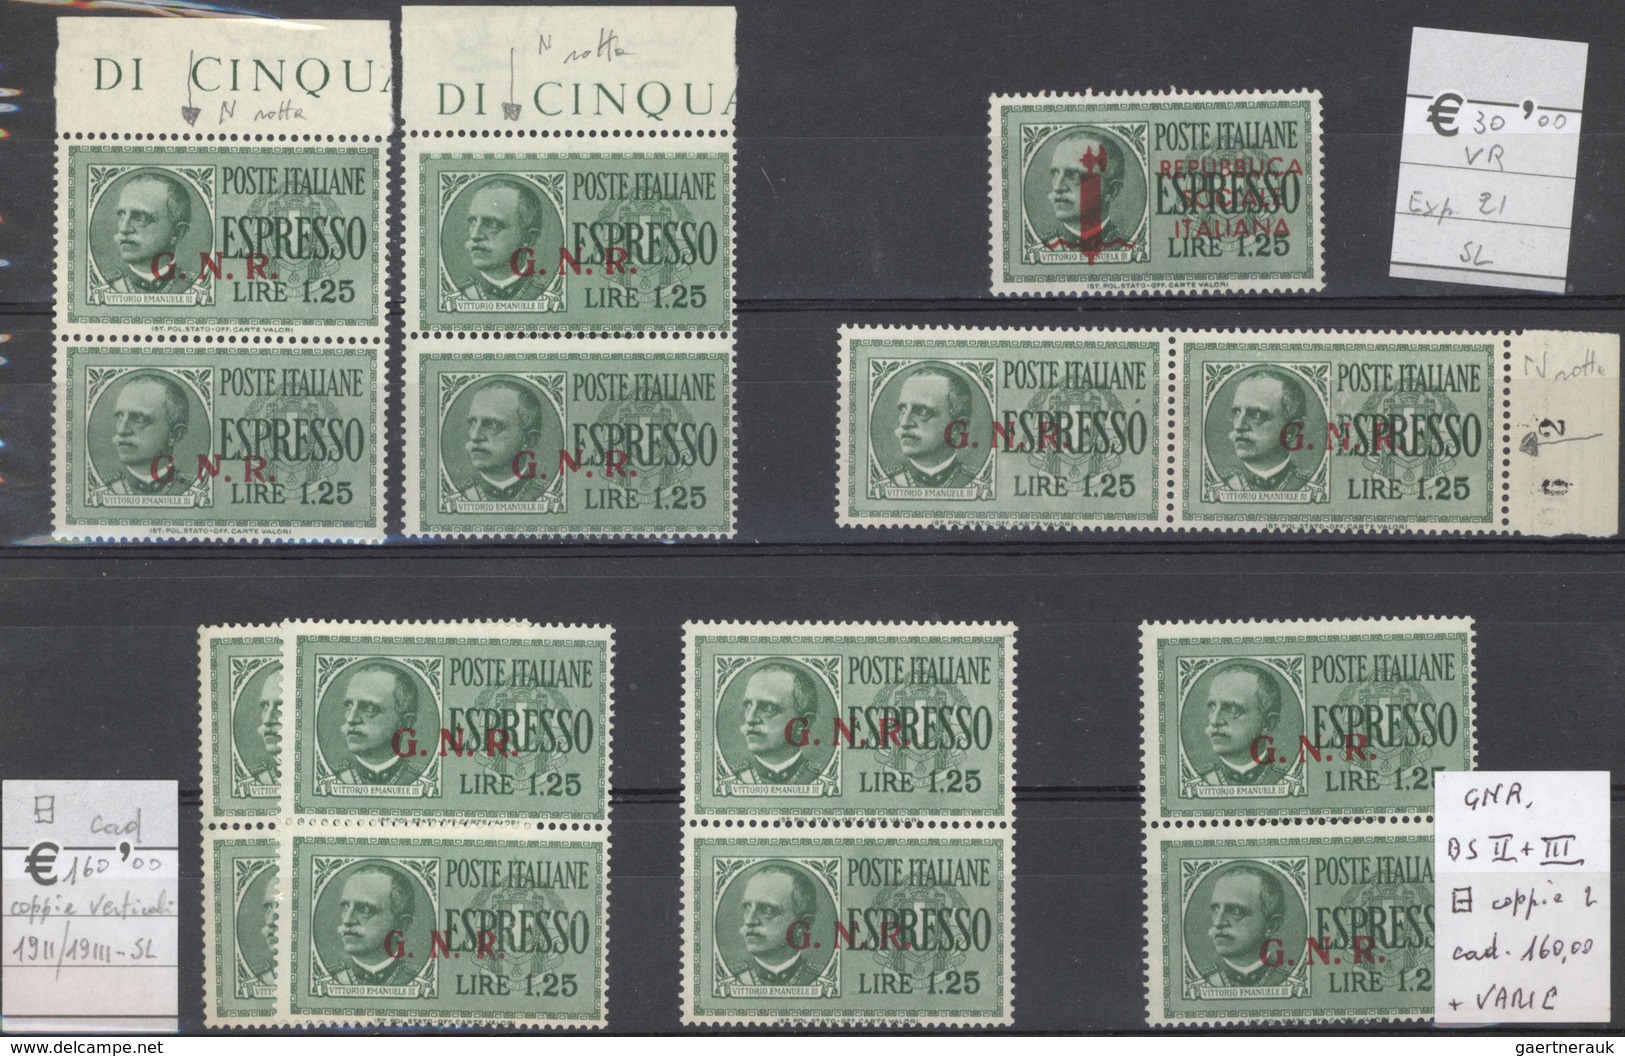 00982 Italien: 1944, SOCIAL REPUBLIC and NATIONAL GUARD OVERPRINTS, very comprehensive lot with multiples